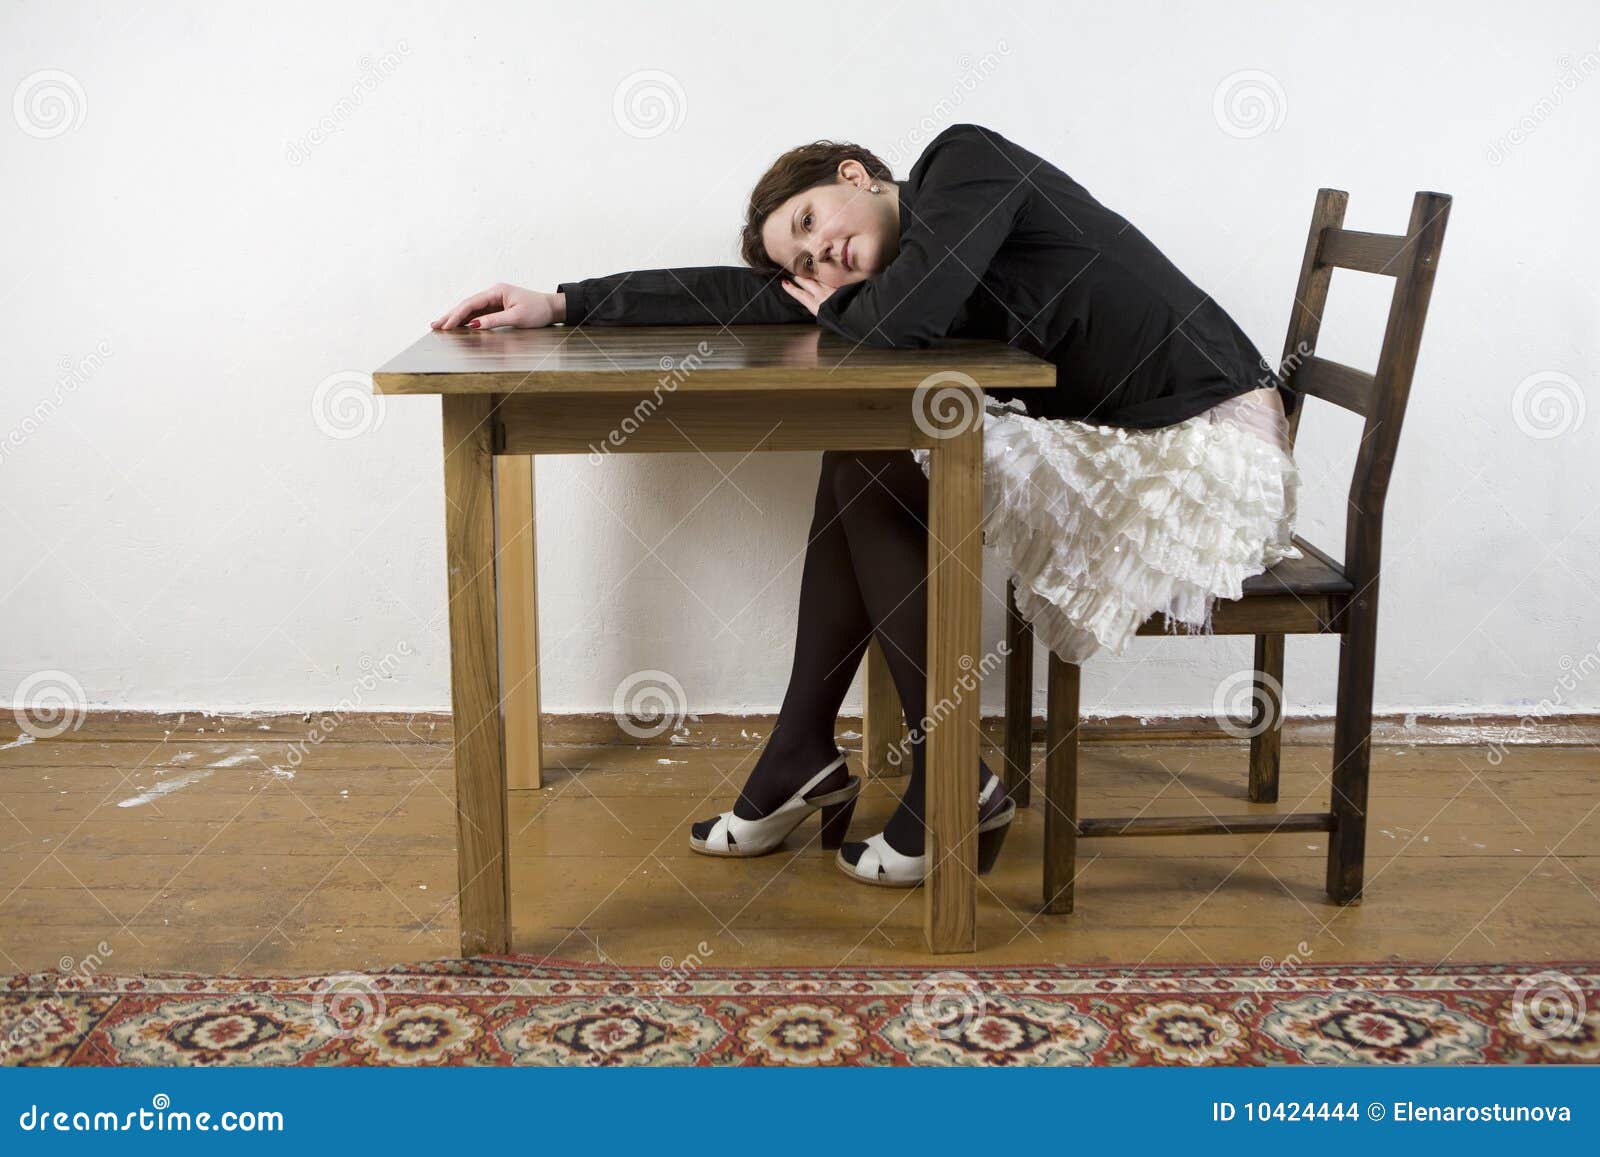 Upset Woman Lying On Table Stock Images Image 10424444